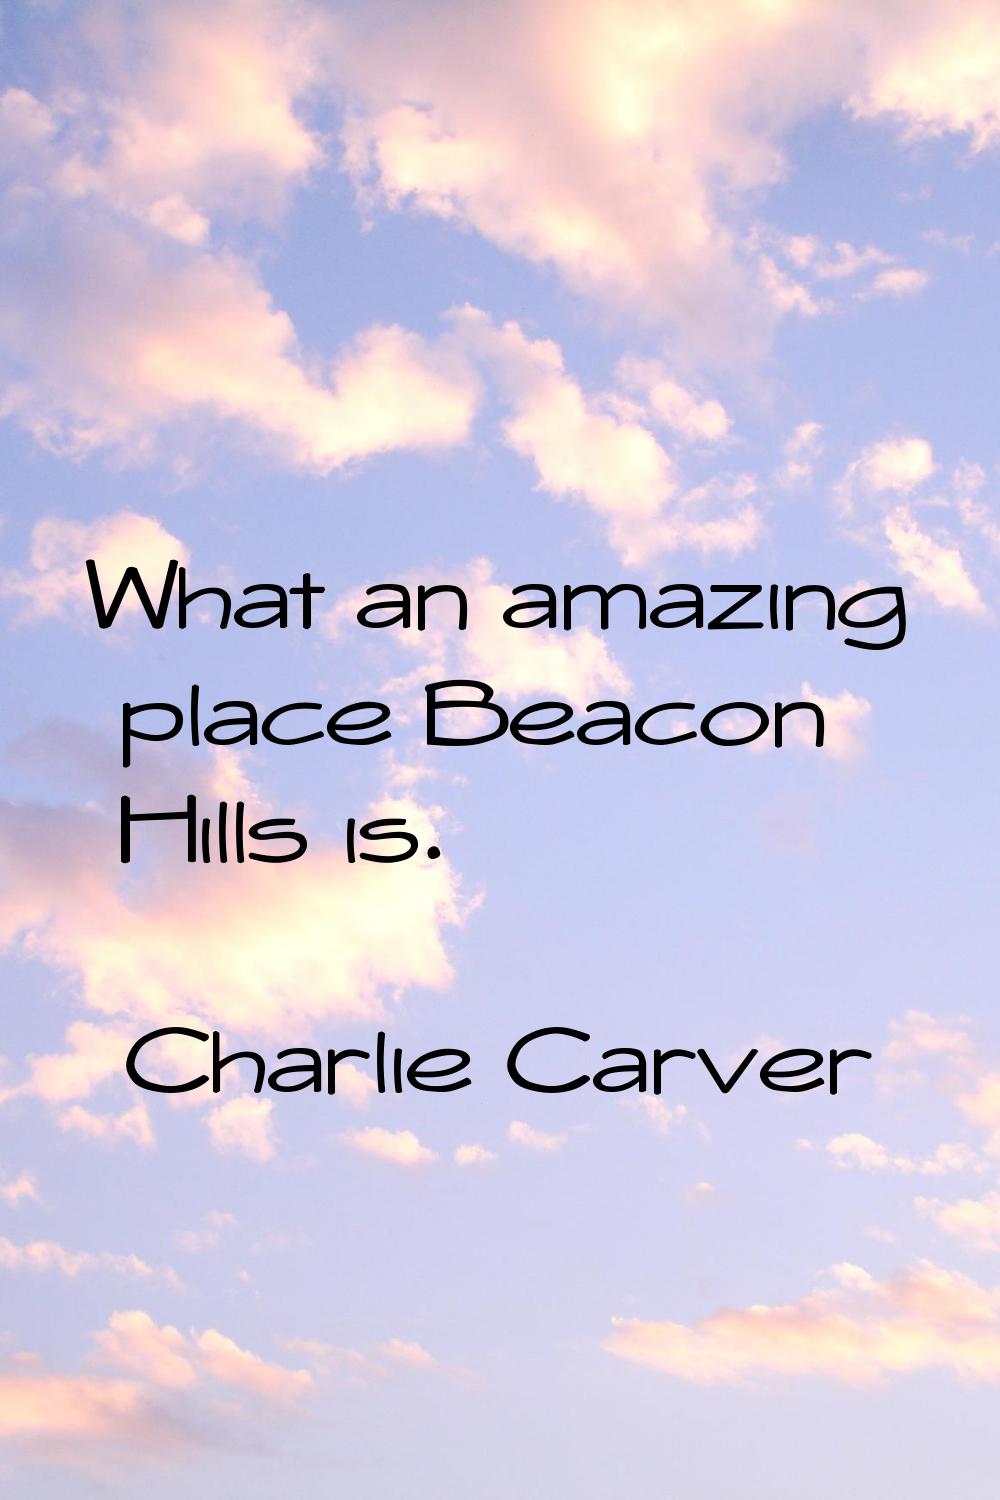 What an amazing place Beacon Hills is.